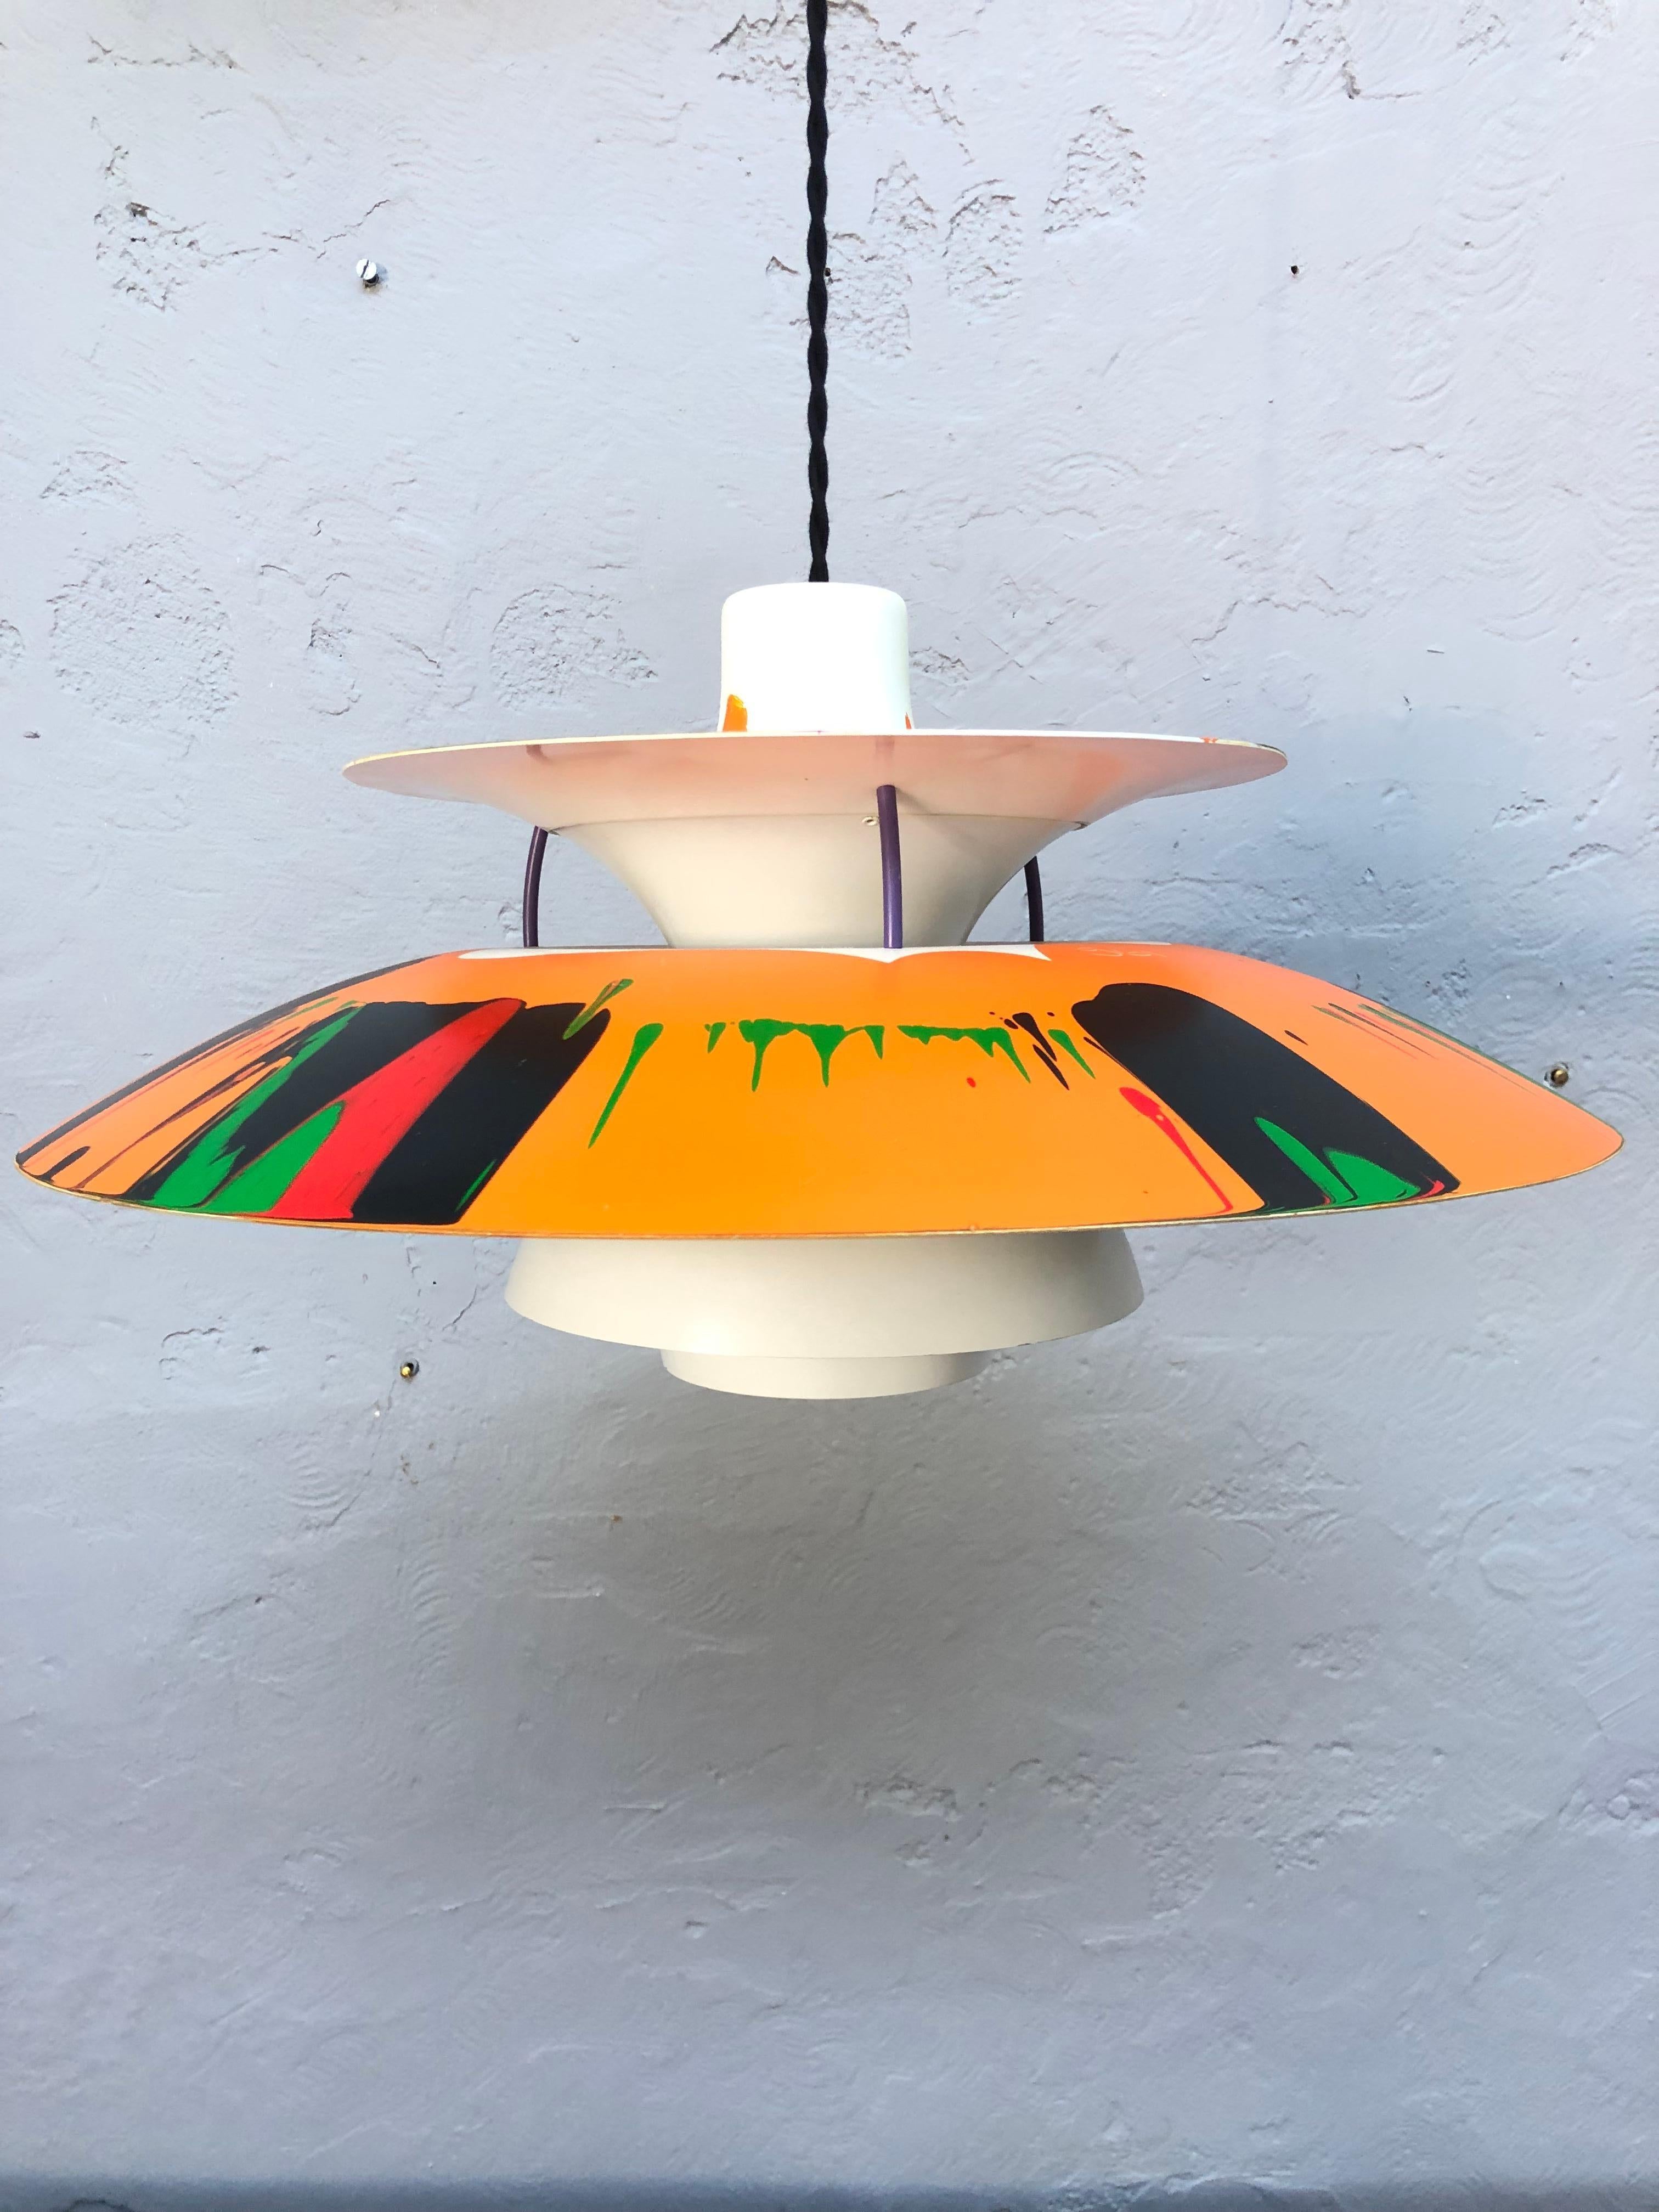 Iconic Vintage PH5 chandelier by Poul Henningsen for Louis Poulsen of Denmark from the 1960s with abstract art work by G61.
Titled “ kaleidoscope”
The art work is acrylic paint with a clear coat finish on top. 
All types of abstract art share a